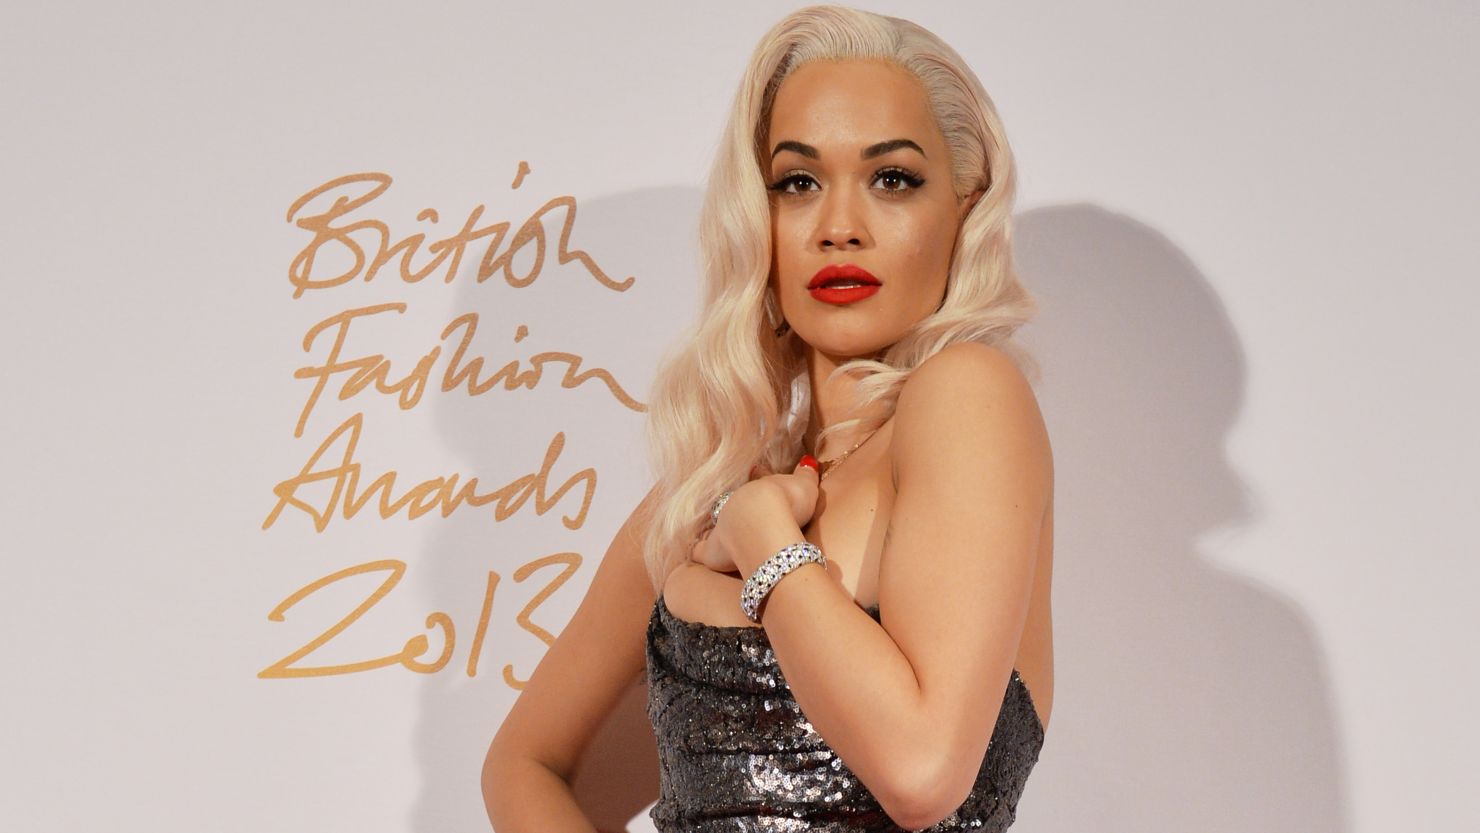 Rita Ora has been cast in the upcoming adaptation of "Fifty Shades of Grey."